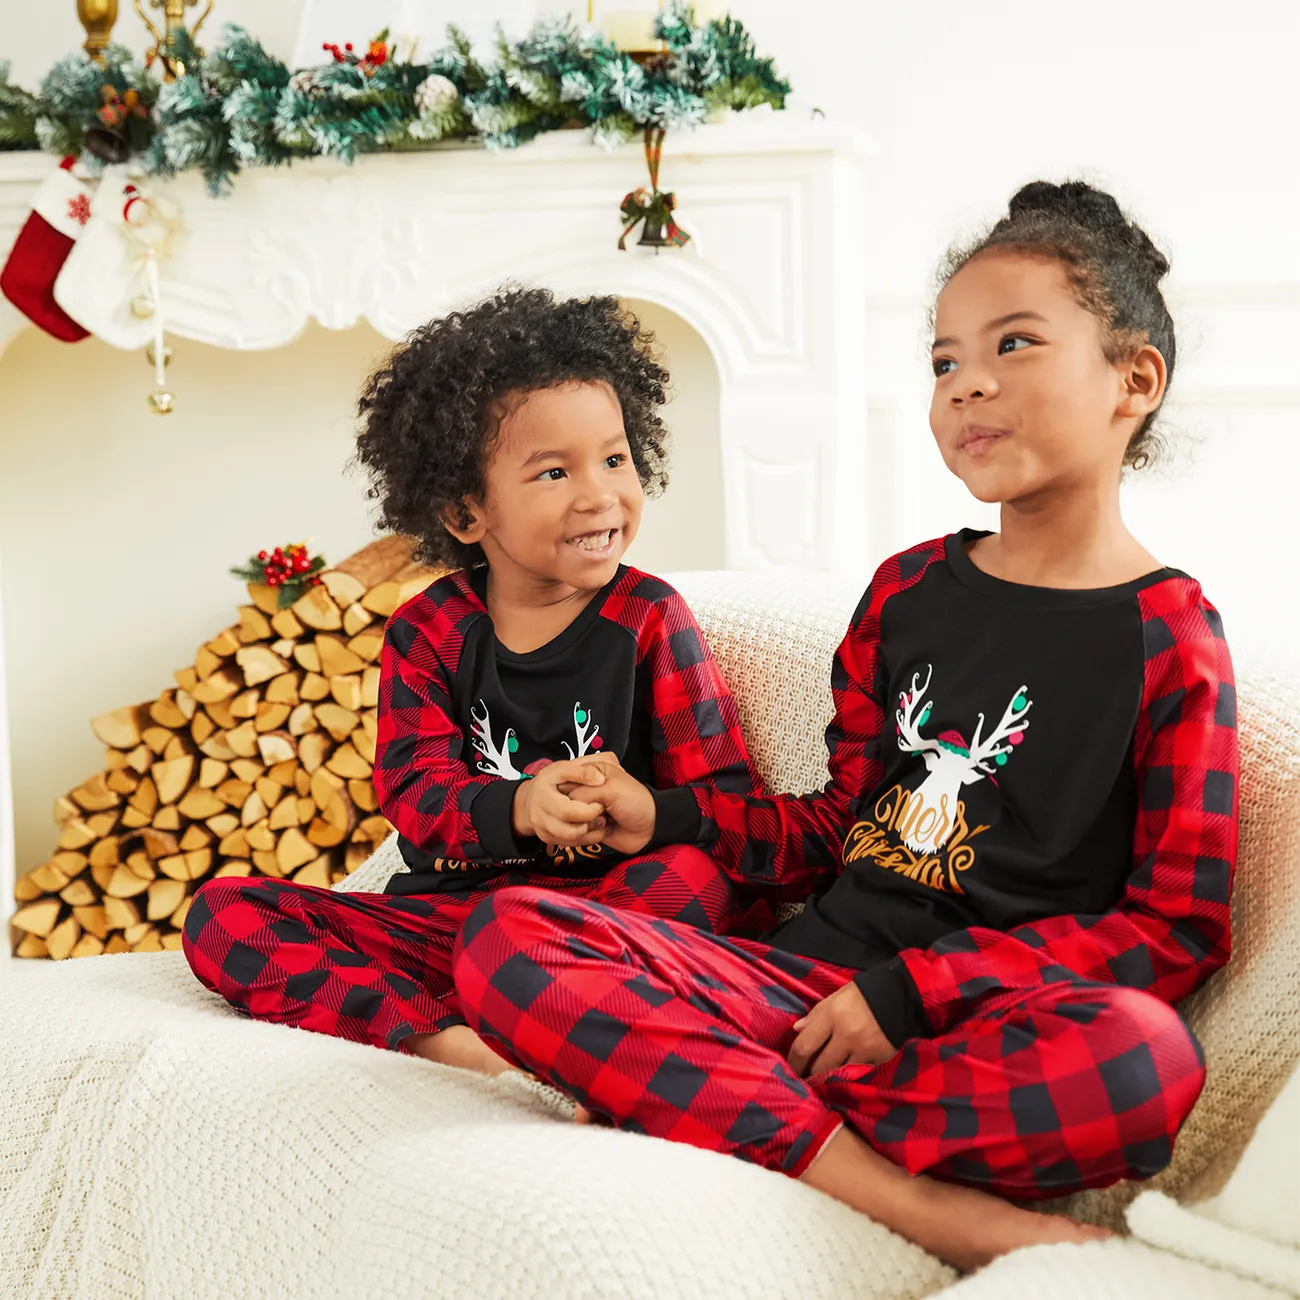 Merry Christmas Letter Antler Print Plaid Splice Matching Pajamas Sets for Family (Flame Resistant) Red big image 1